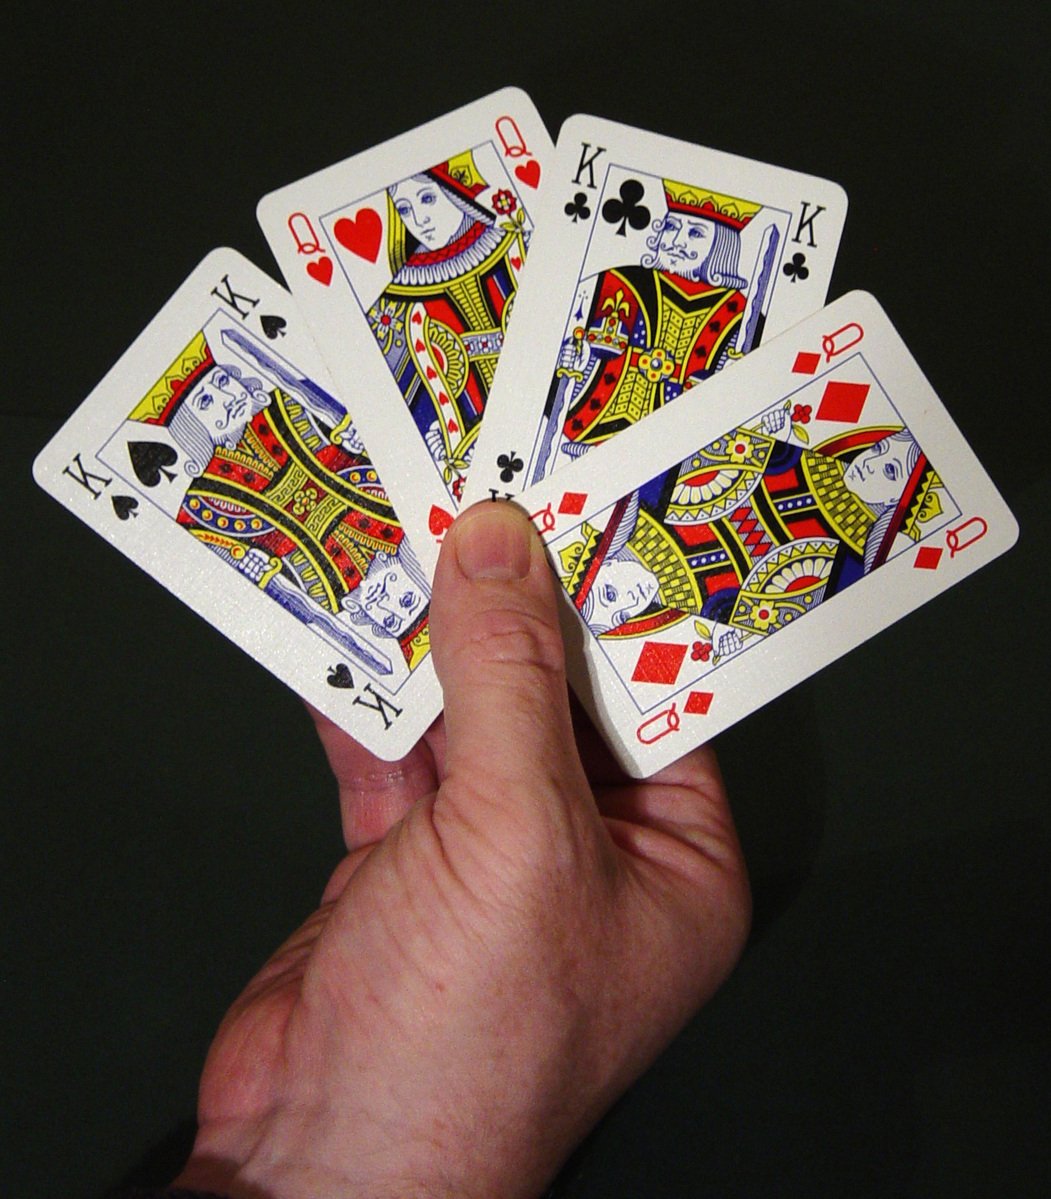 large-print-playing-cards-ideal-for-people-with-visual-impairment